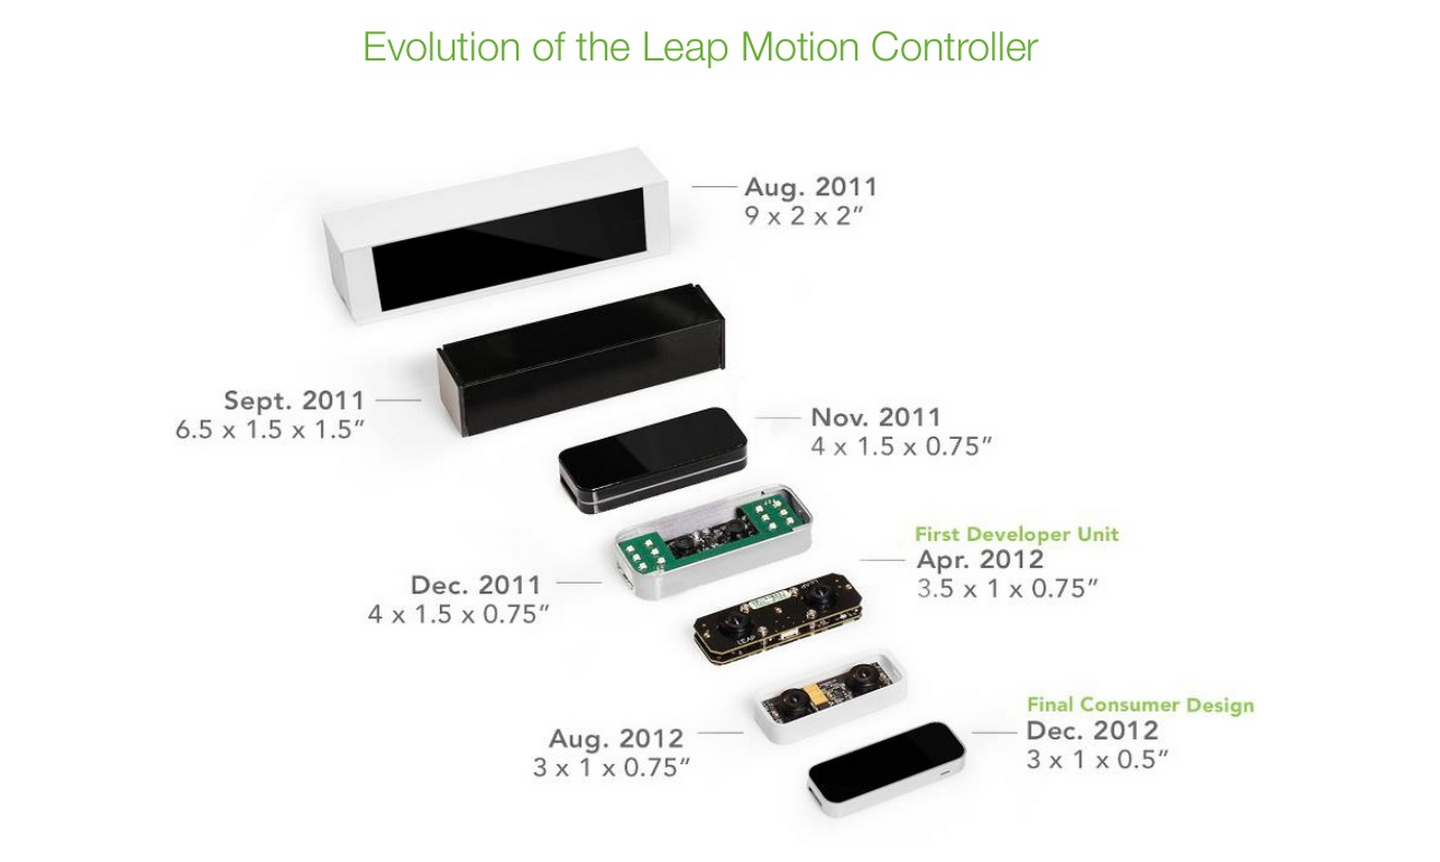 How the Leap Motion controller evolved over time (Source: Leap Motion)